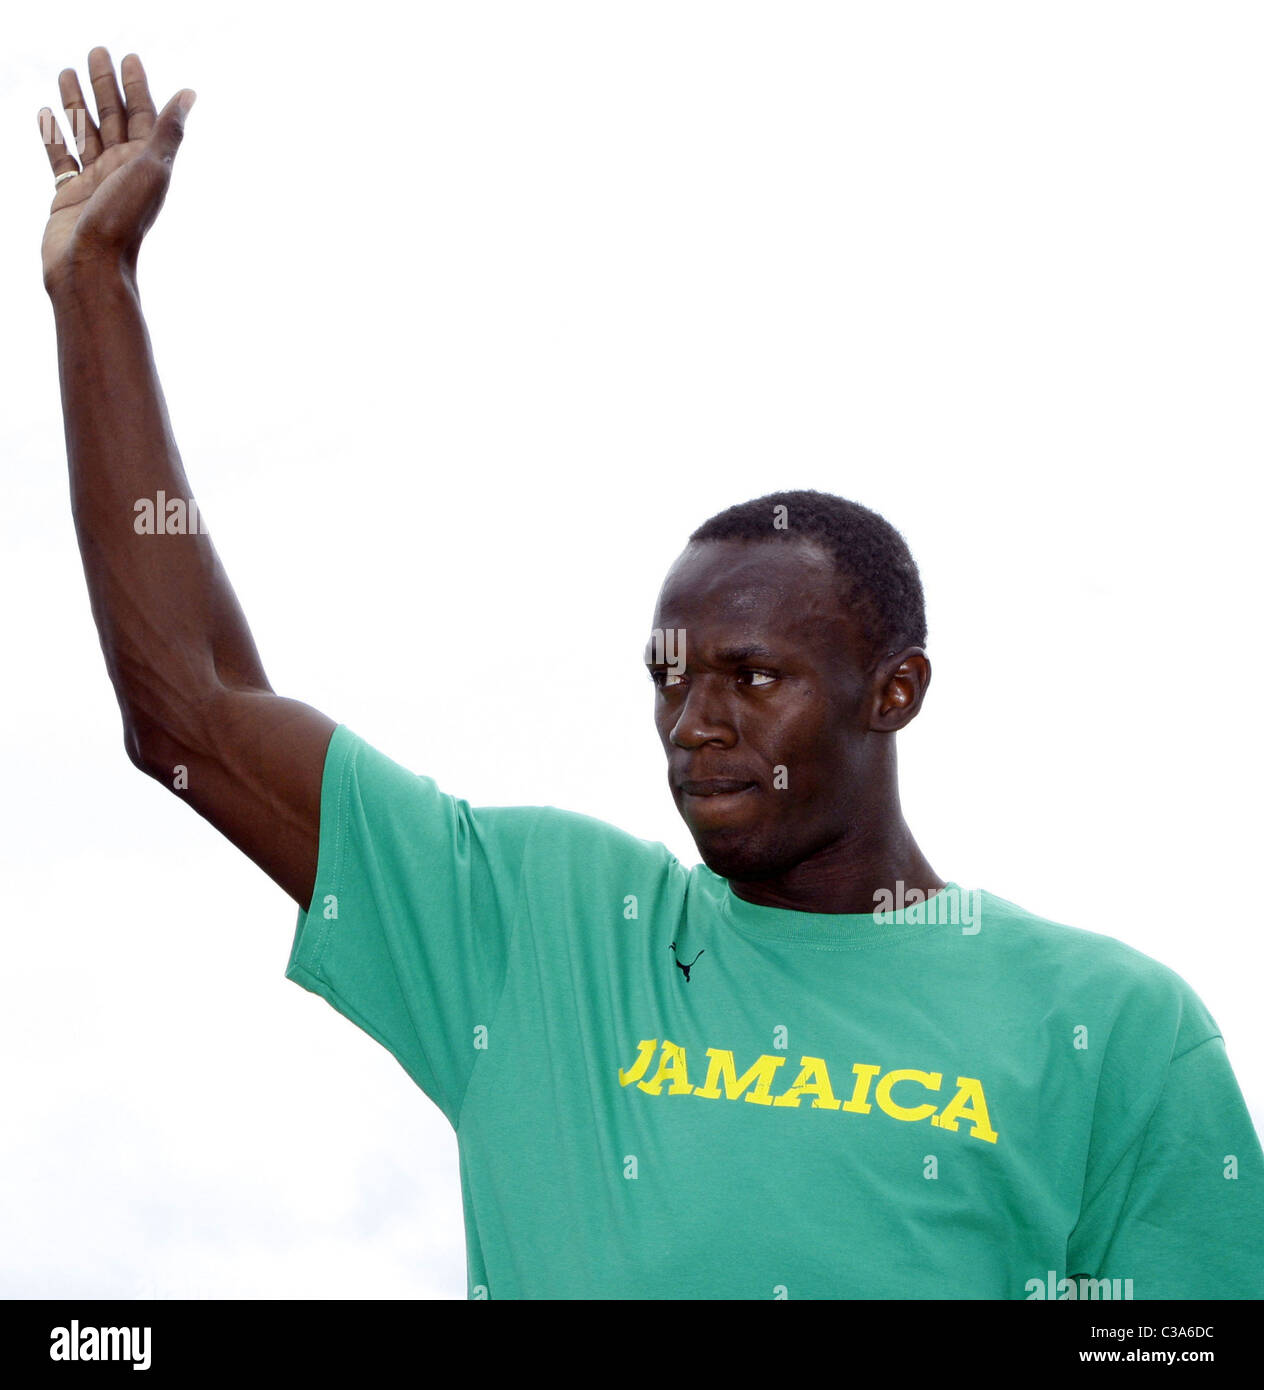 Olympic Usain Bolt at the PUMA Street to help search to find the next 'World's Fastest Man' Boston Stock Photo - Alamy